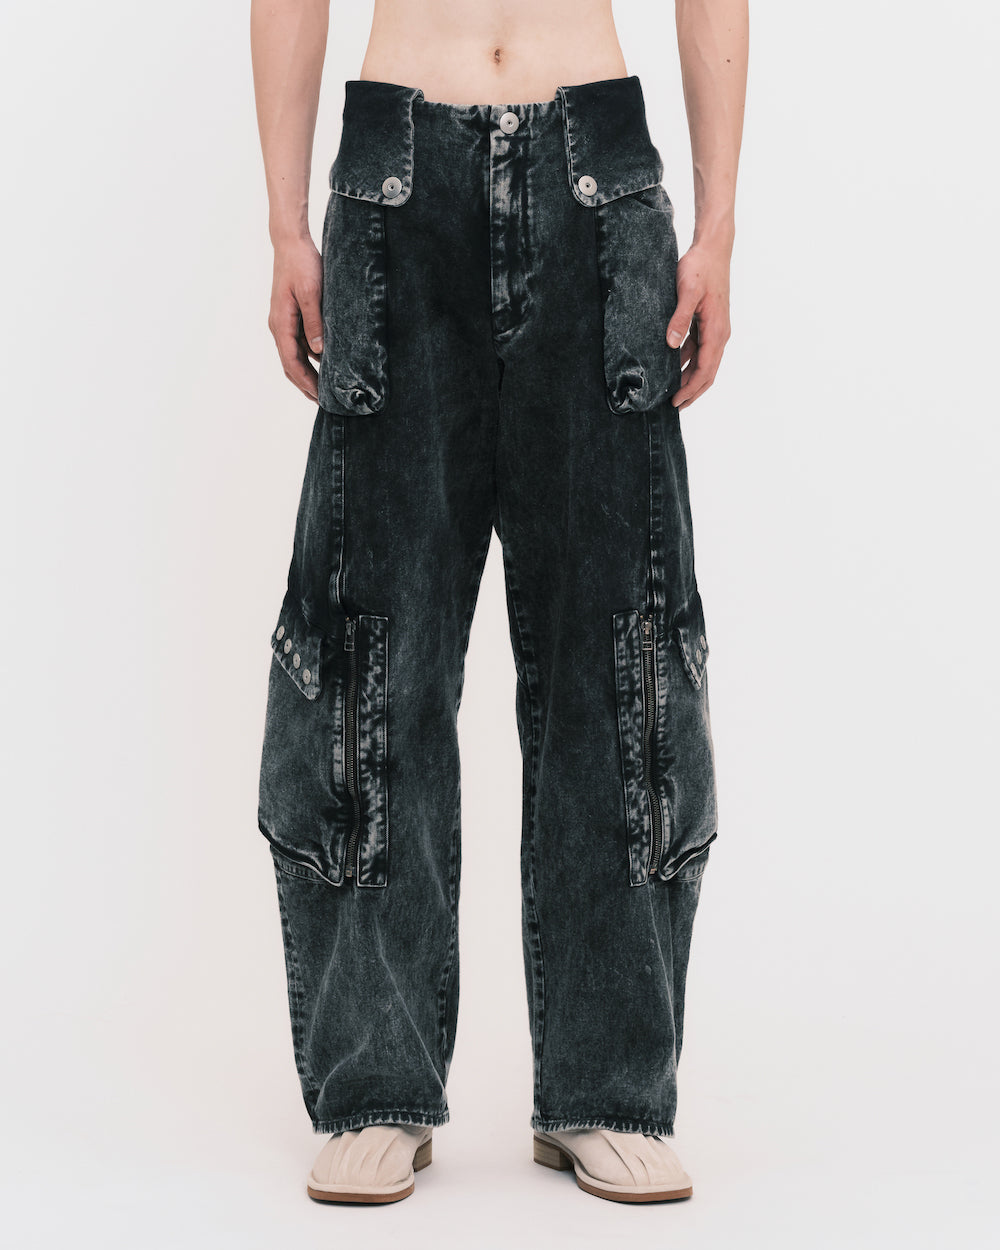 Totem Cargo Trousers